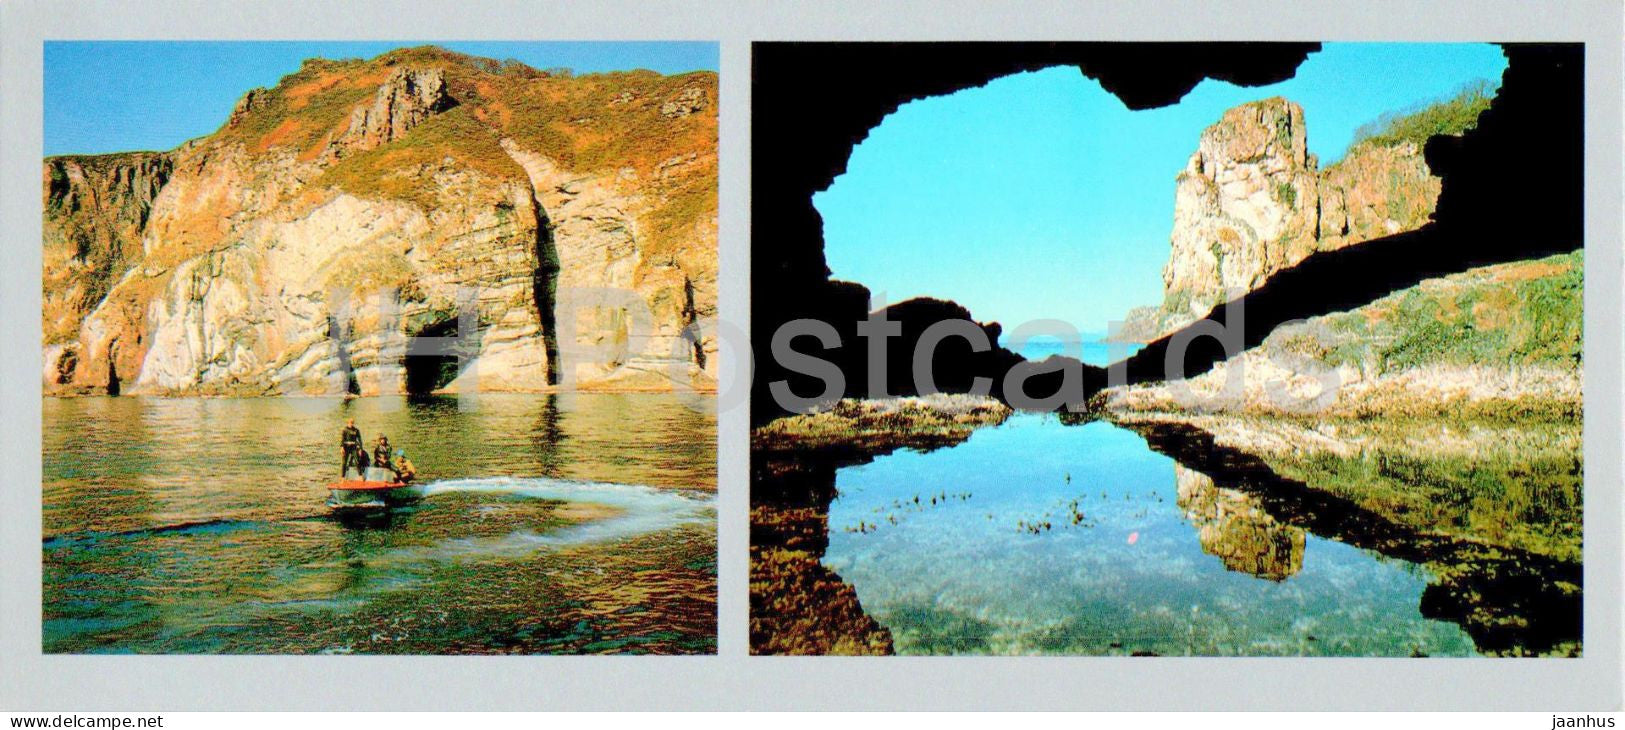 Bay of the Peter the Great - Marble coasts and grottos of Durnovo island - boat - 1980 - Russia USSR - unused - JH Postcards